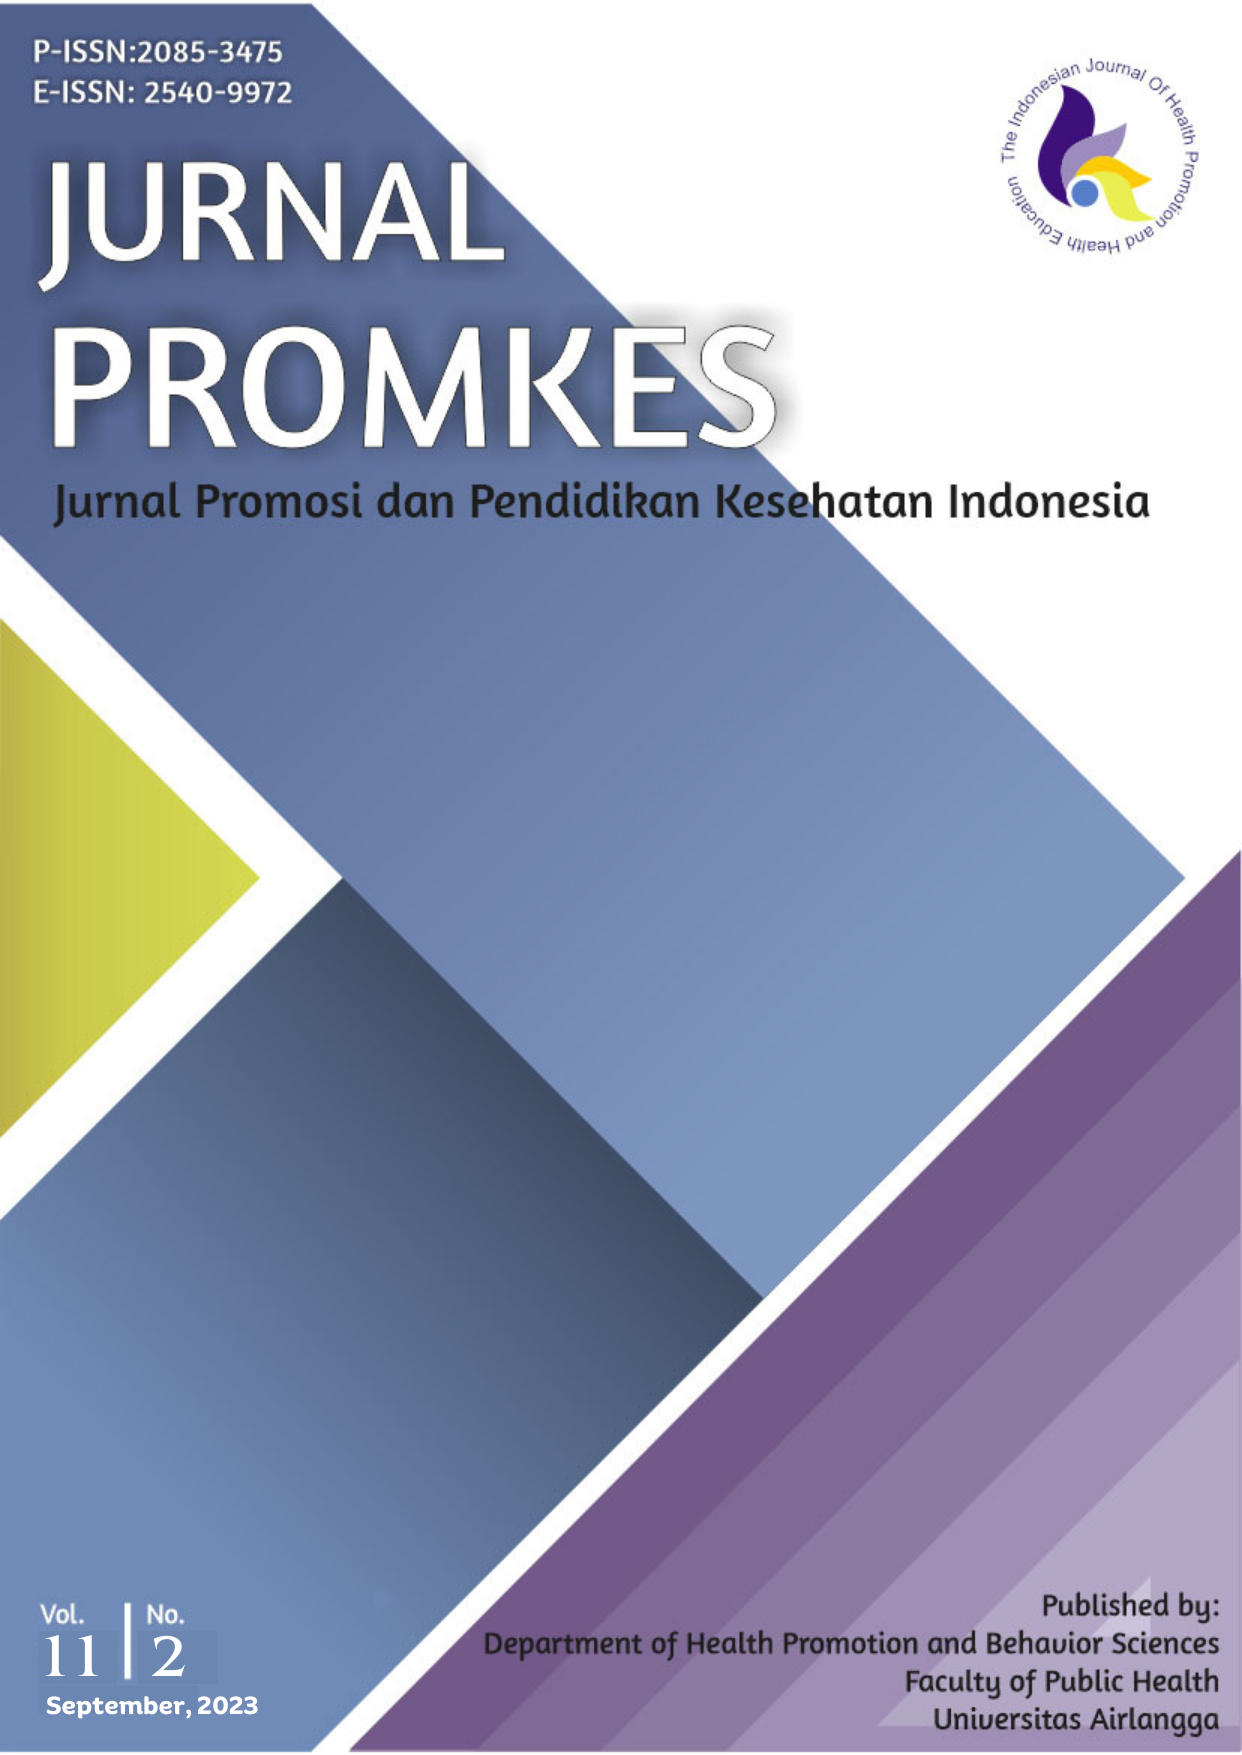 								View Vol. 11 No. 2 (2023): Jurnal Promkes: The Indonesian Journal of Health Promotion and Health Education
							